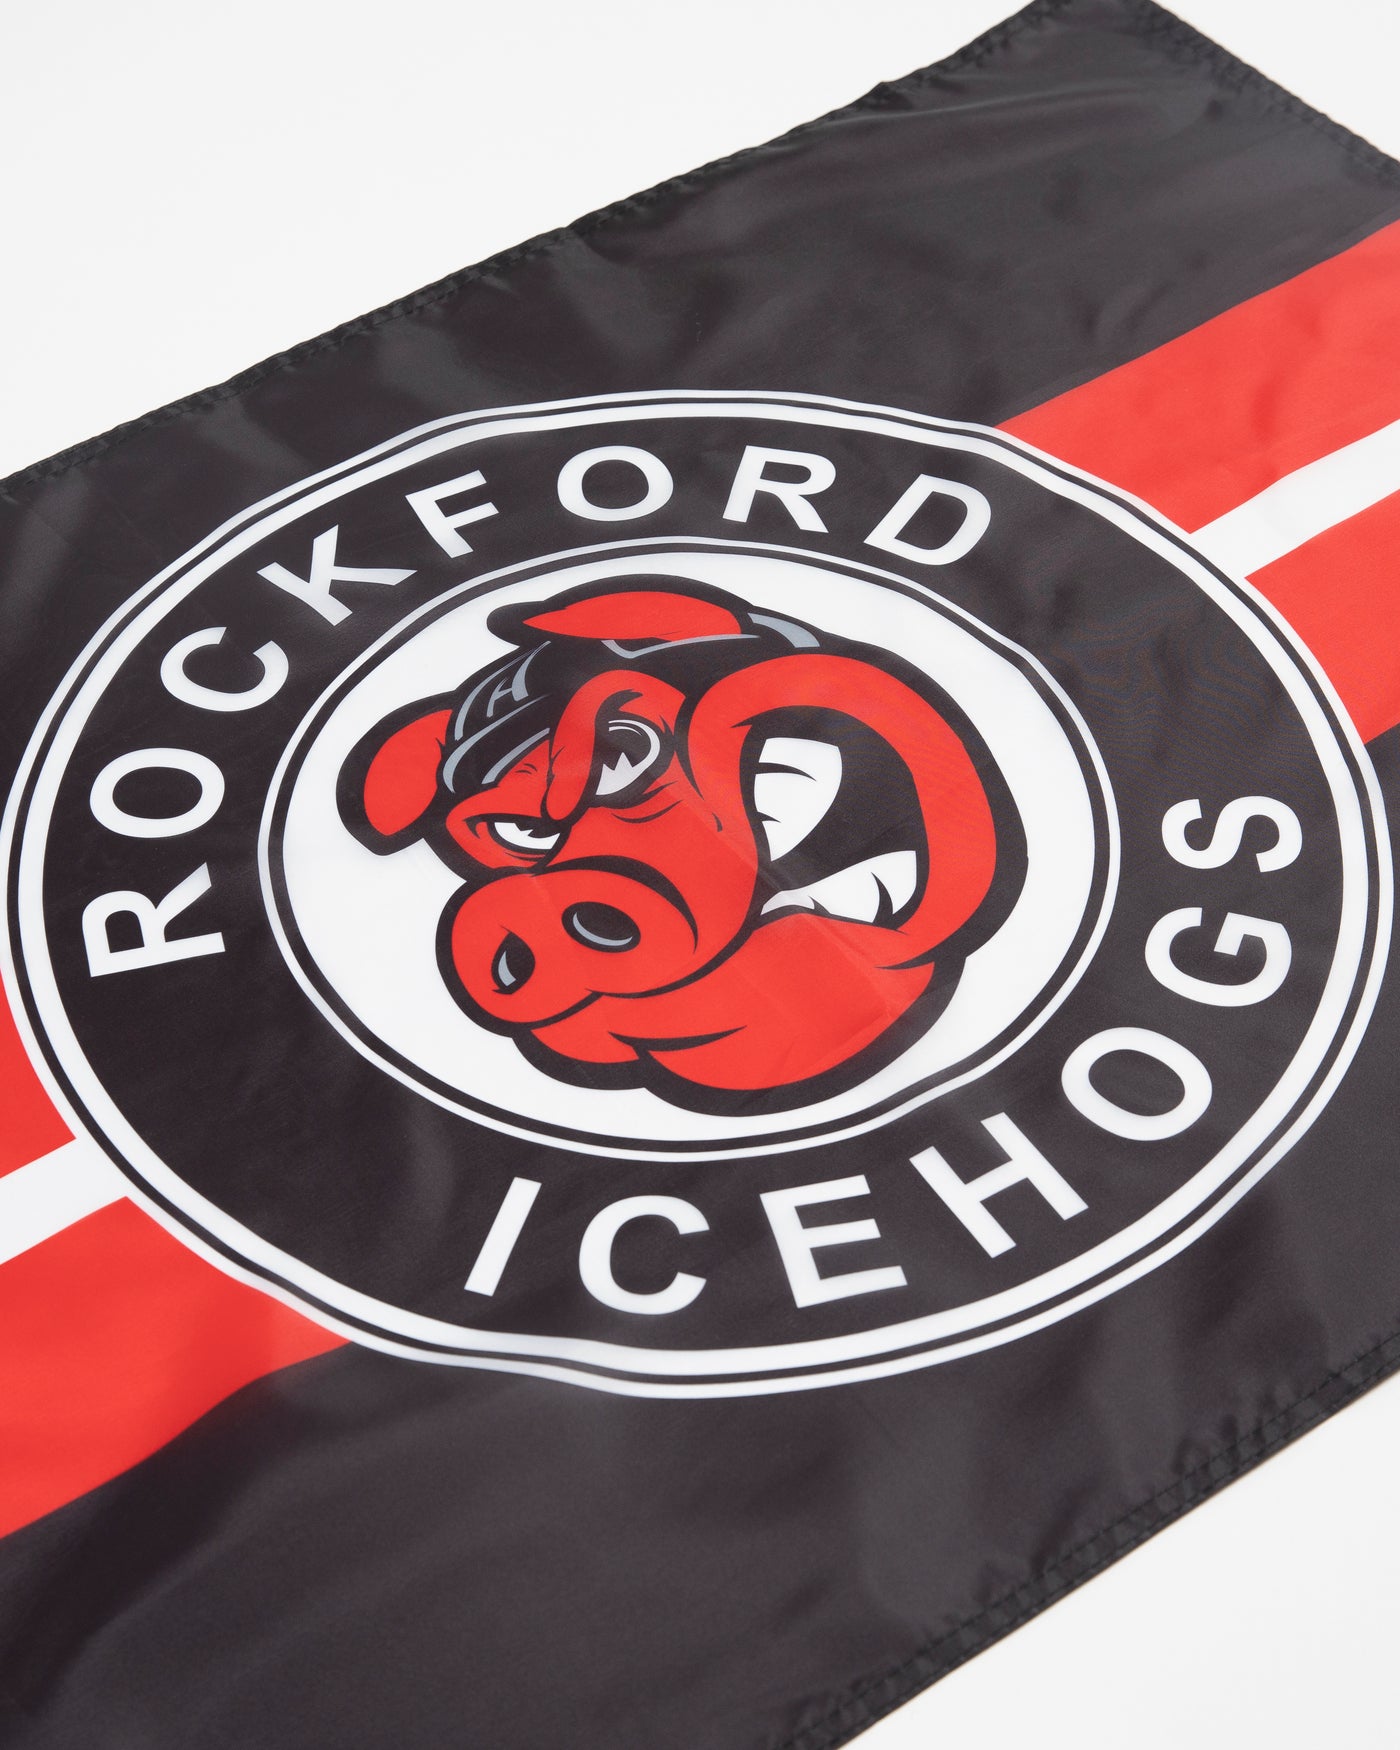 Black, white and red Rockford IceHogs flag with team logo - detail lay flat